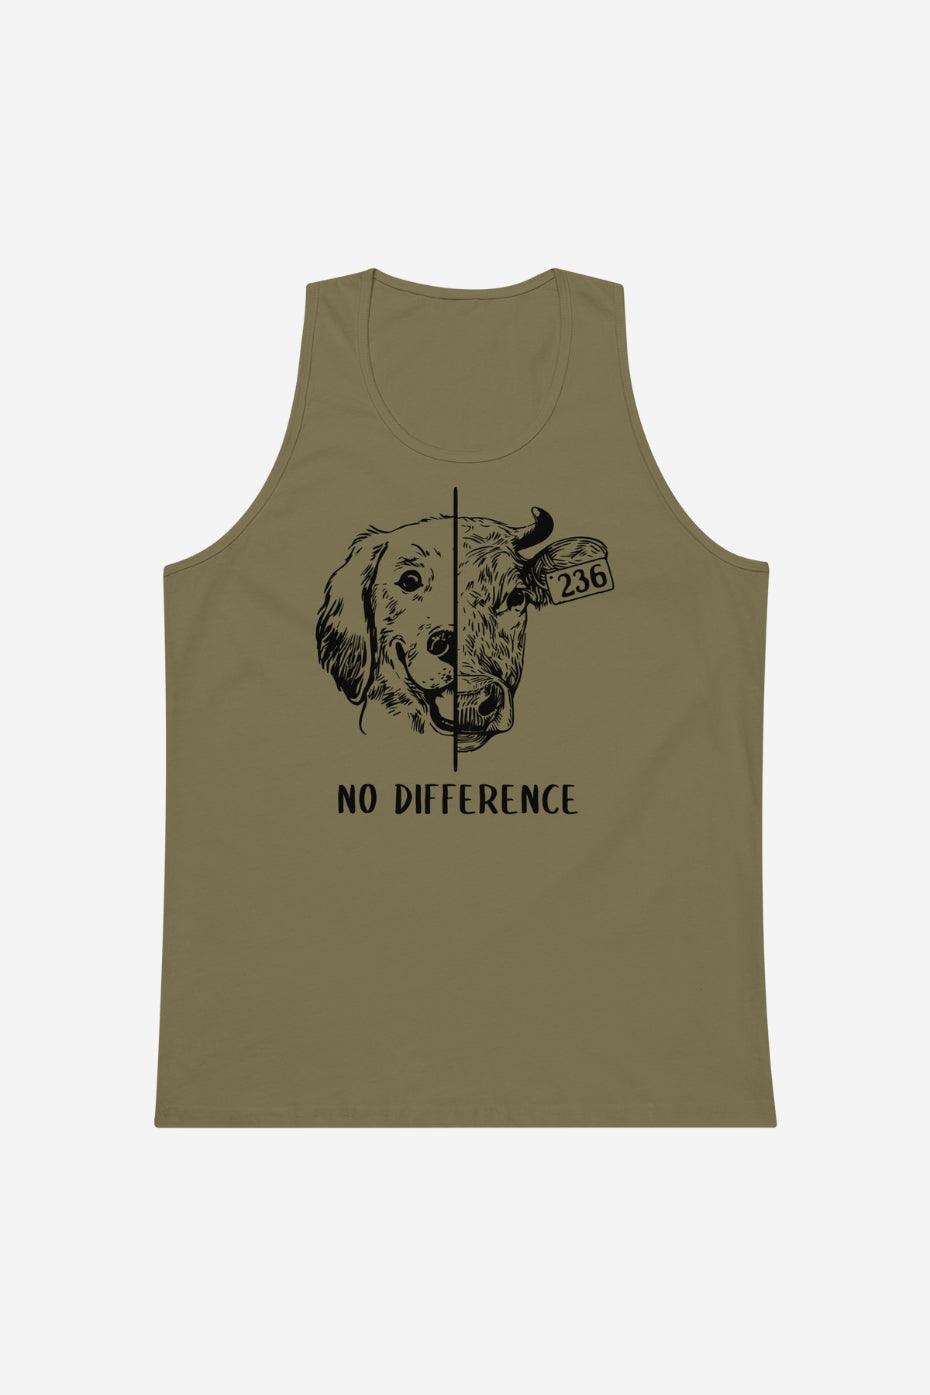 No Difference Men’s premium tank top